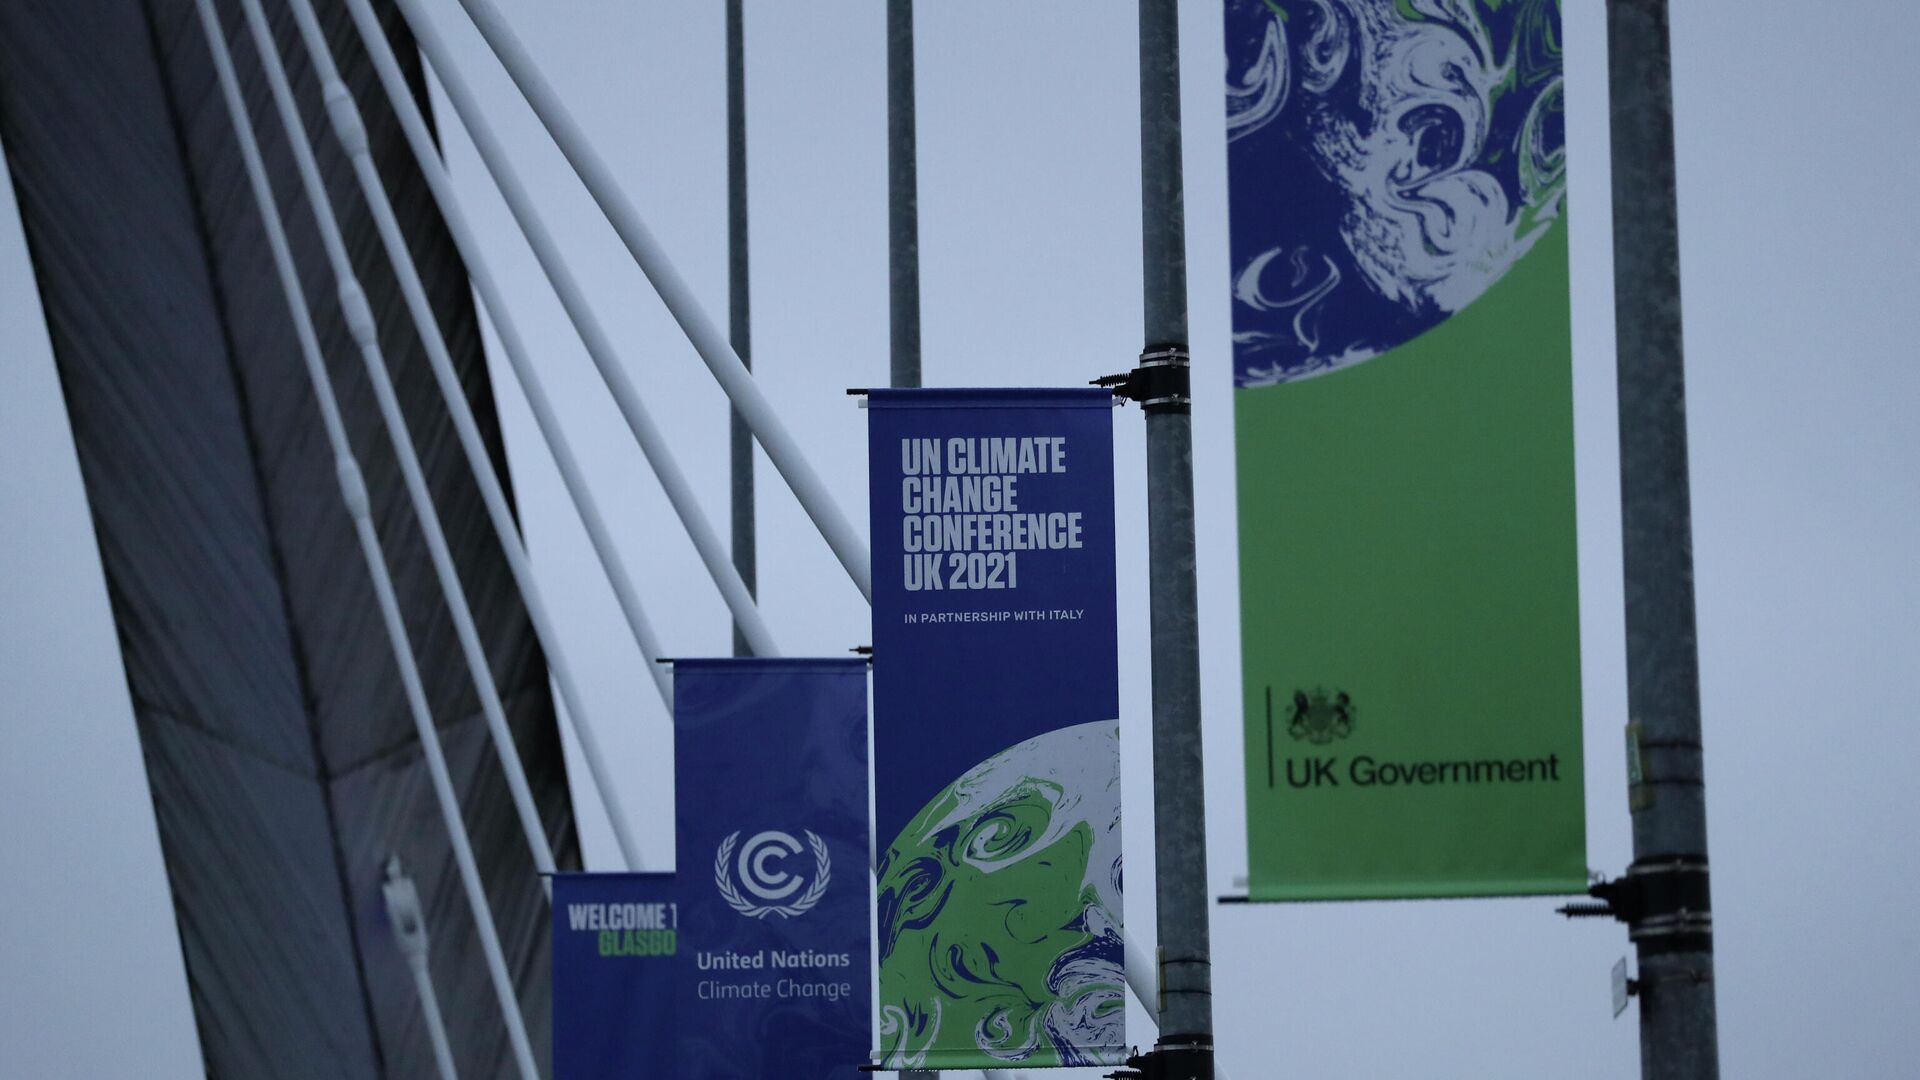 Preparations for the 26th Conference of the Parties to the United Nations Framework Convention on Climate Change (COP26) in Glasgow - 1920, 01.11.2021